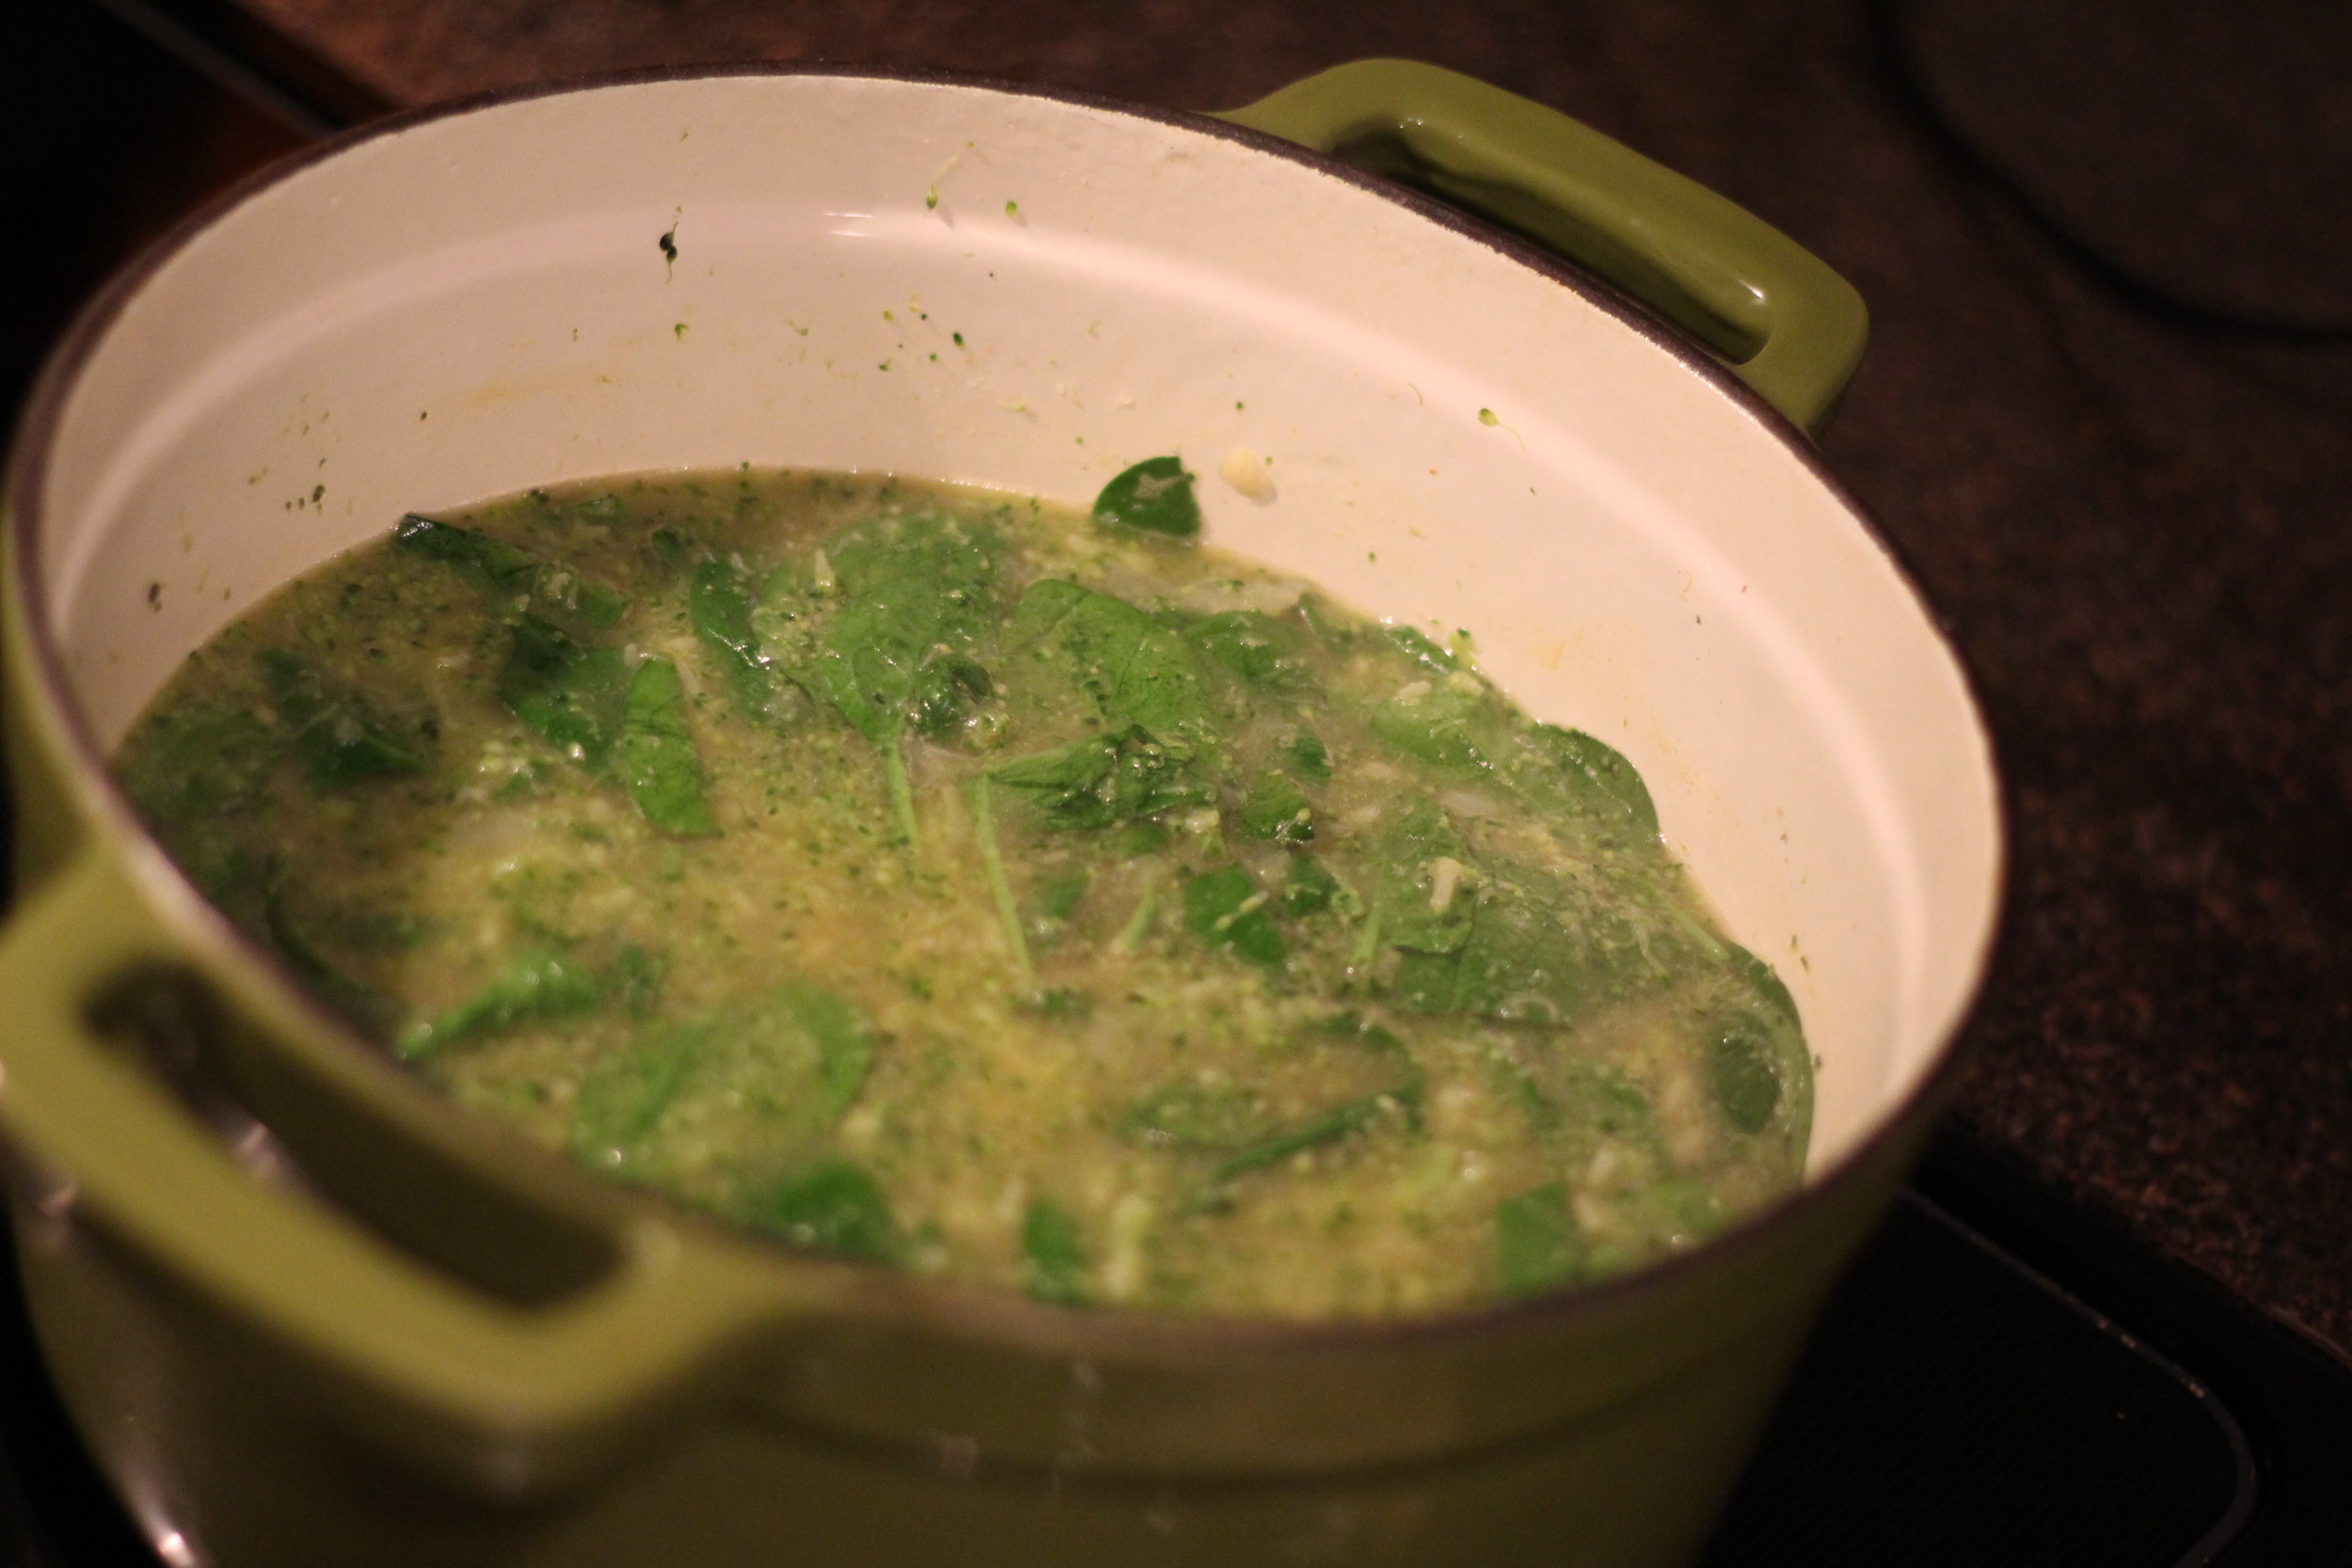  Spinach helps add body and contributes to the incredible color of the finished soup. 